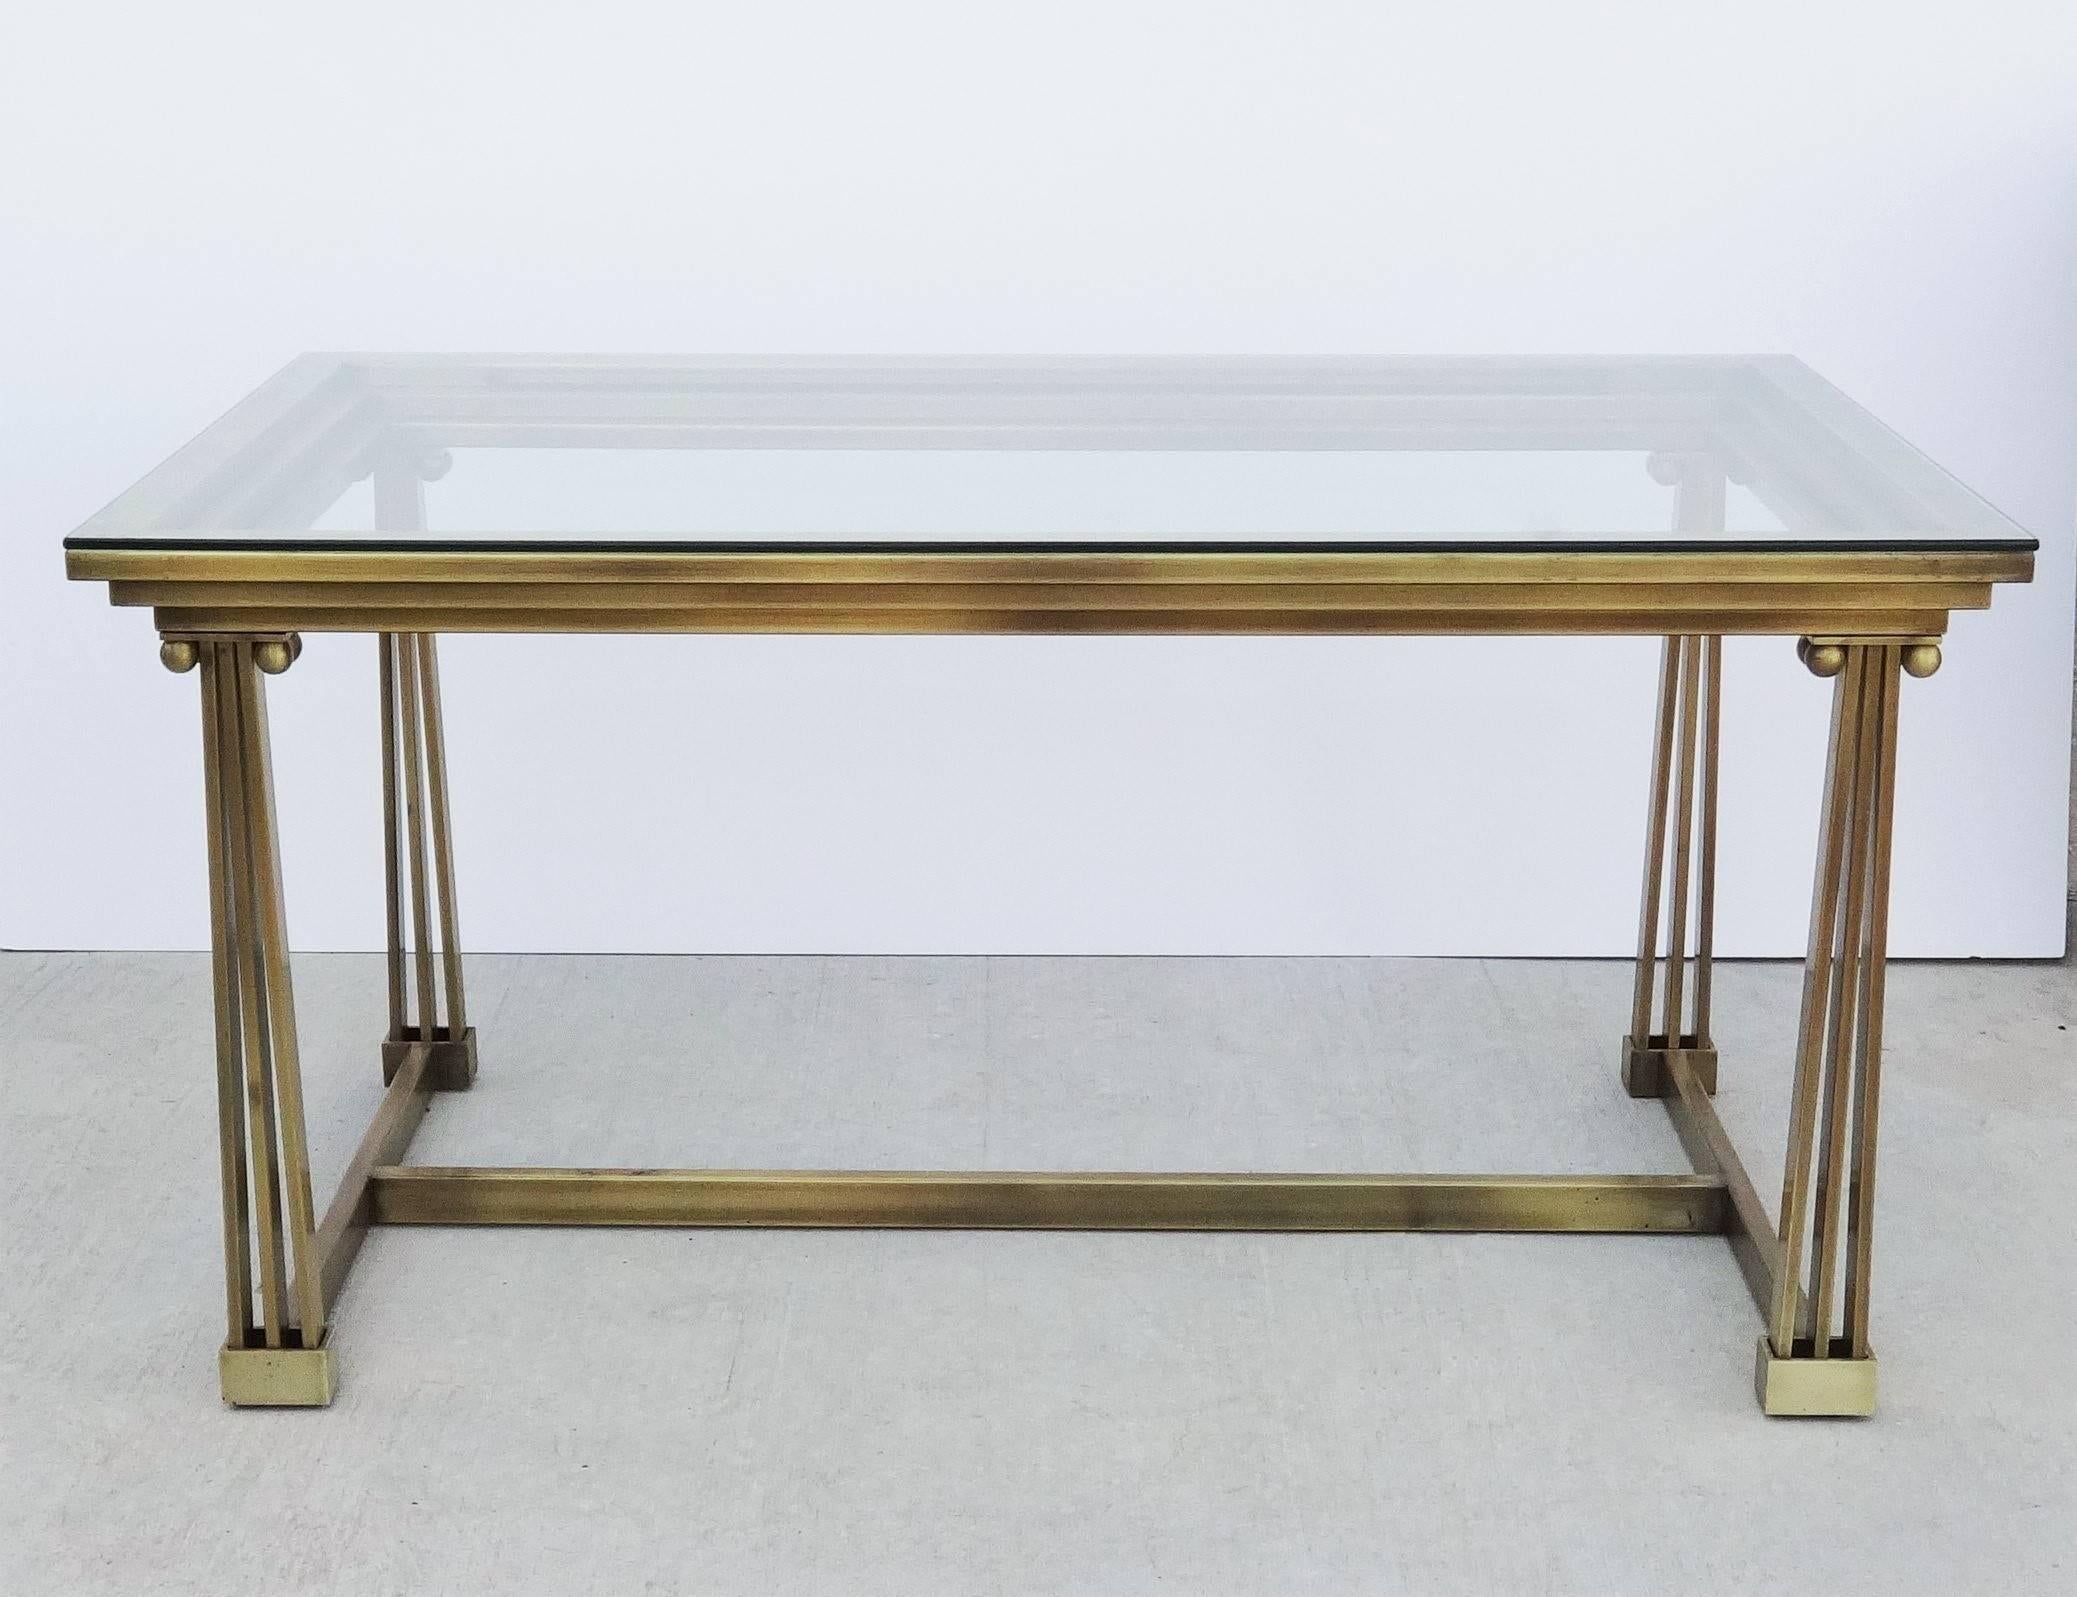 Two Brass & Glass Desk or Dining Table, Mastercraft In Good Condition For Sale In Dallas, TX